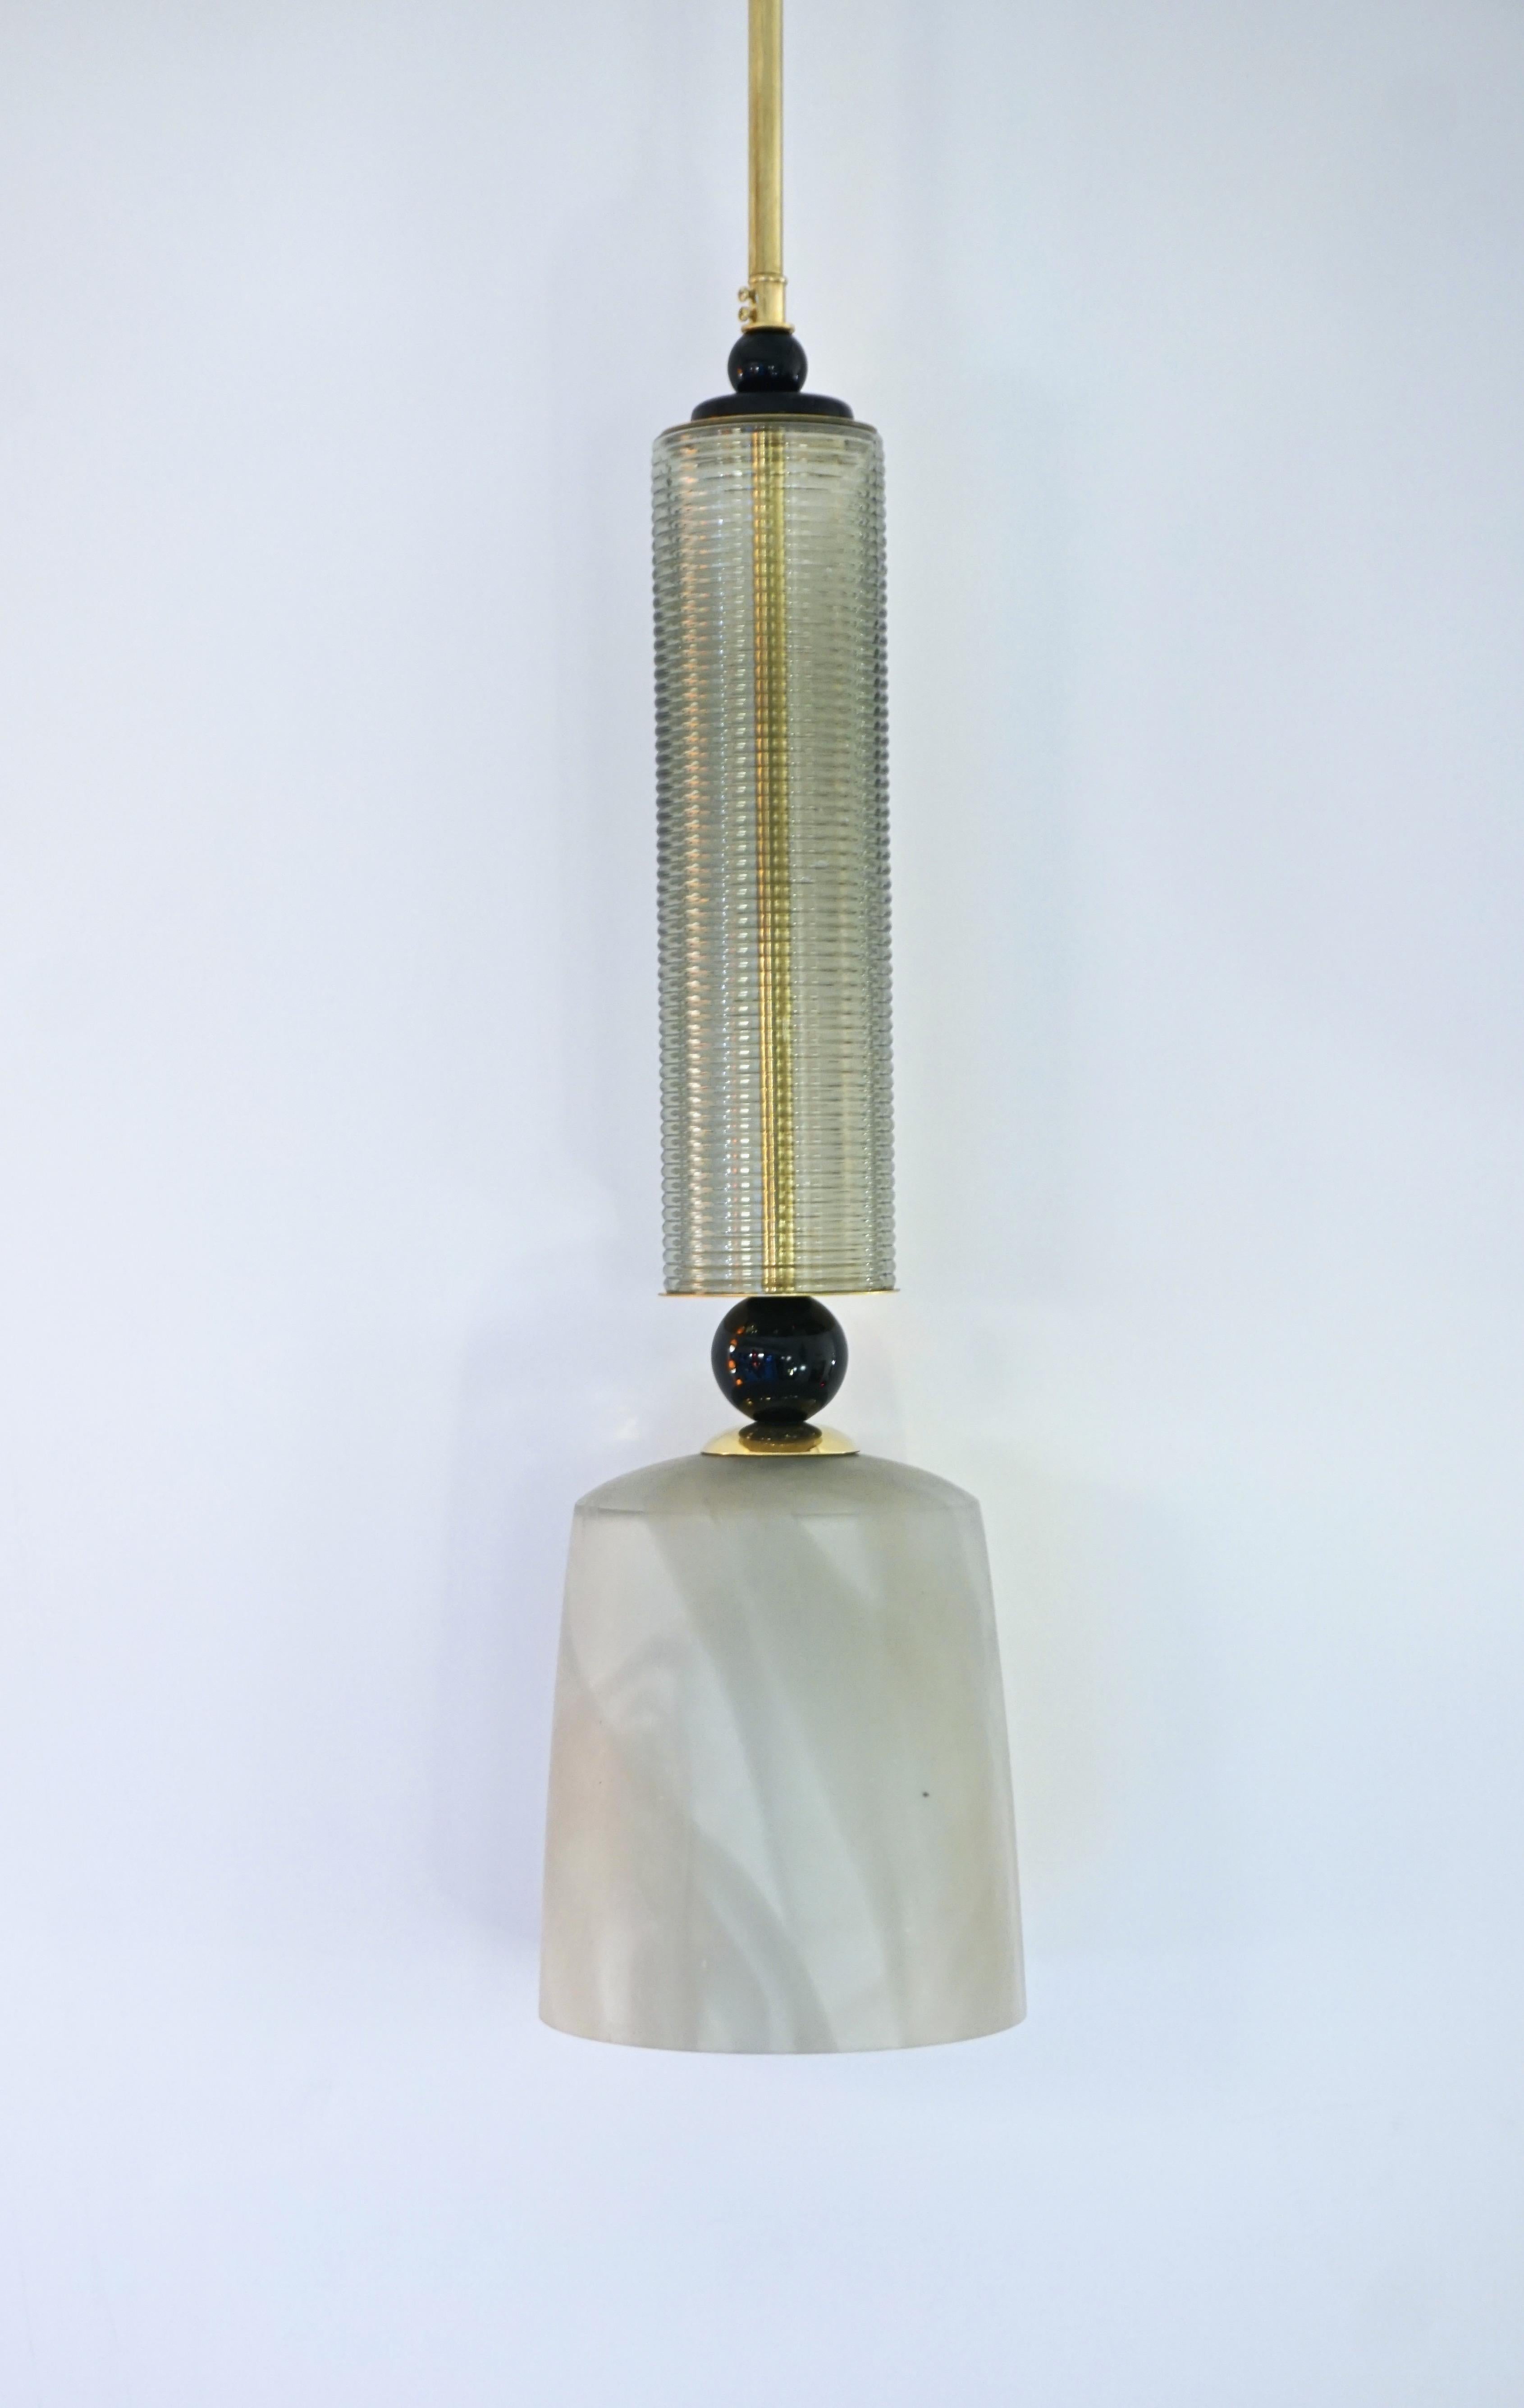 Price is per individual item - Fun and elegant Italian pendant chandelier, entirely handcrafted, of organic modern design consisting of a succession of elements: black opaline glass accents highlighting a mouthblown reeded glass cylinder, a handmade